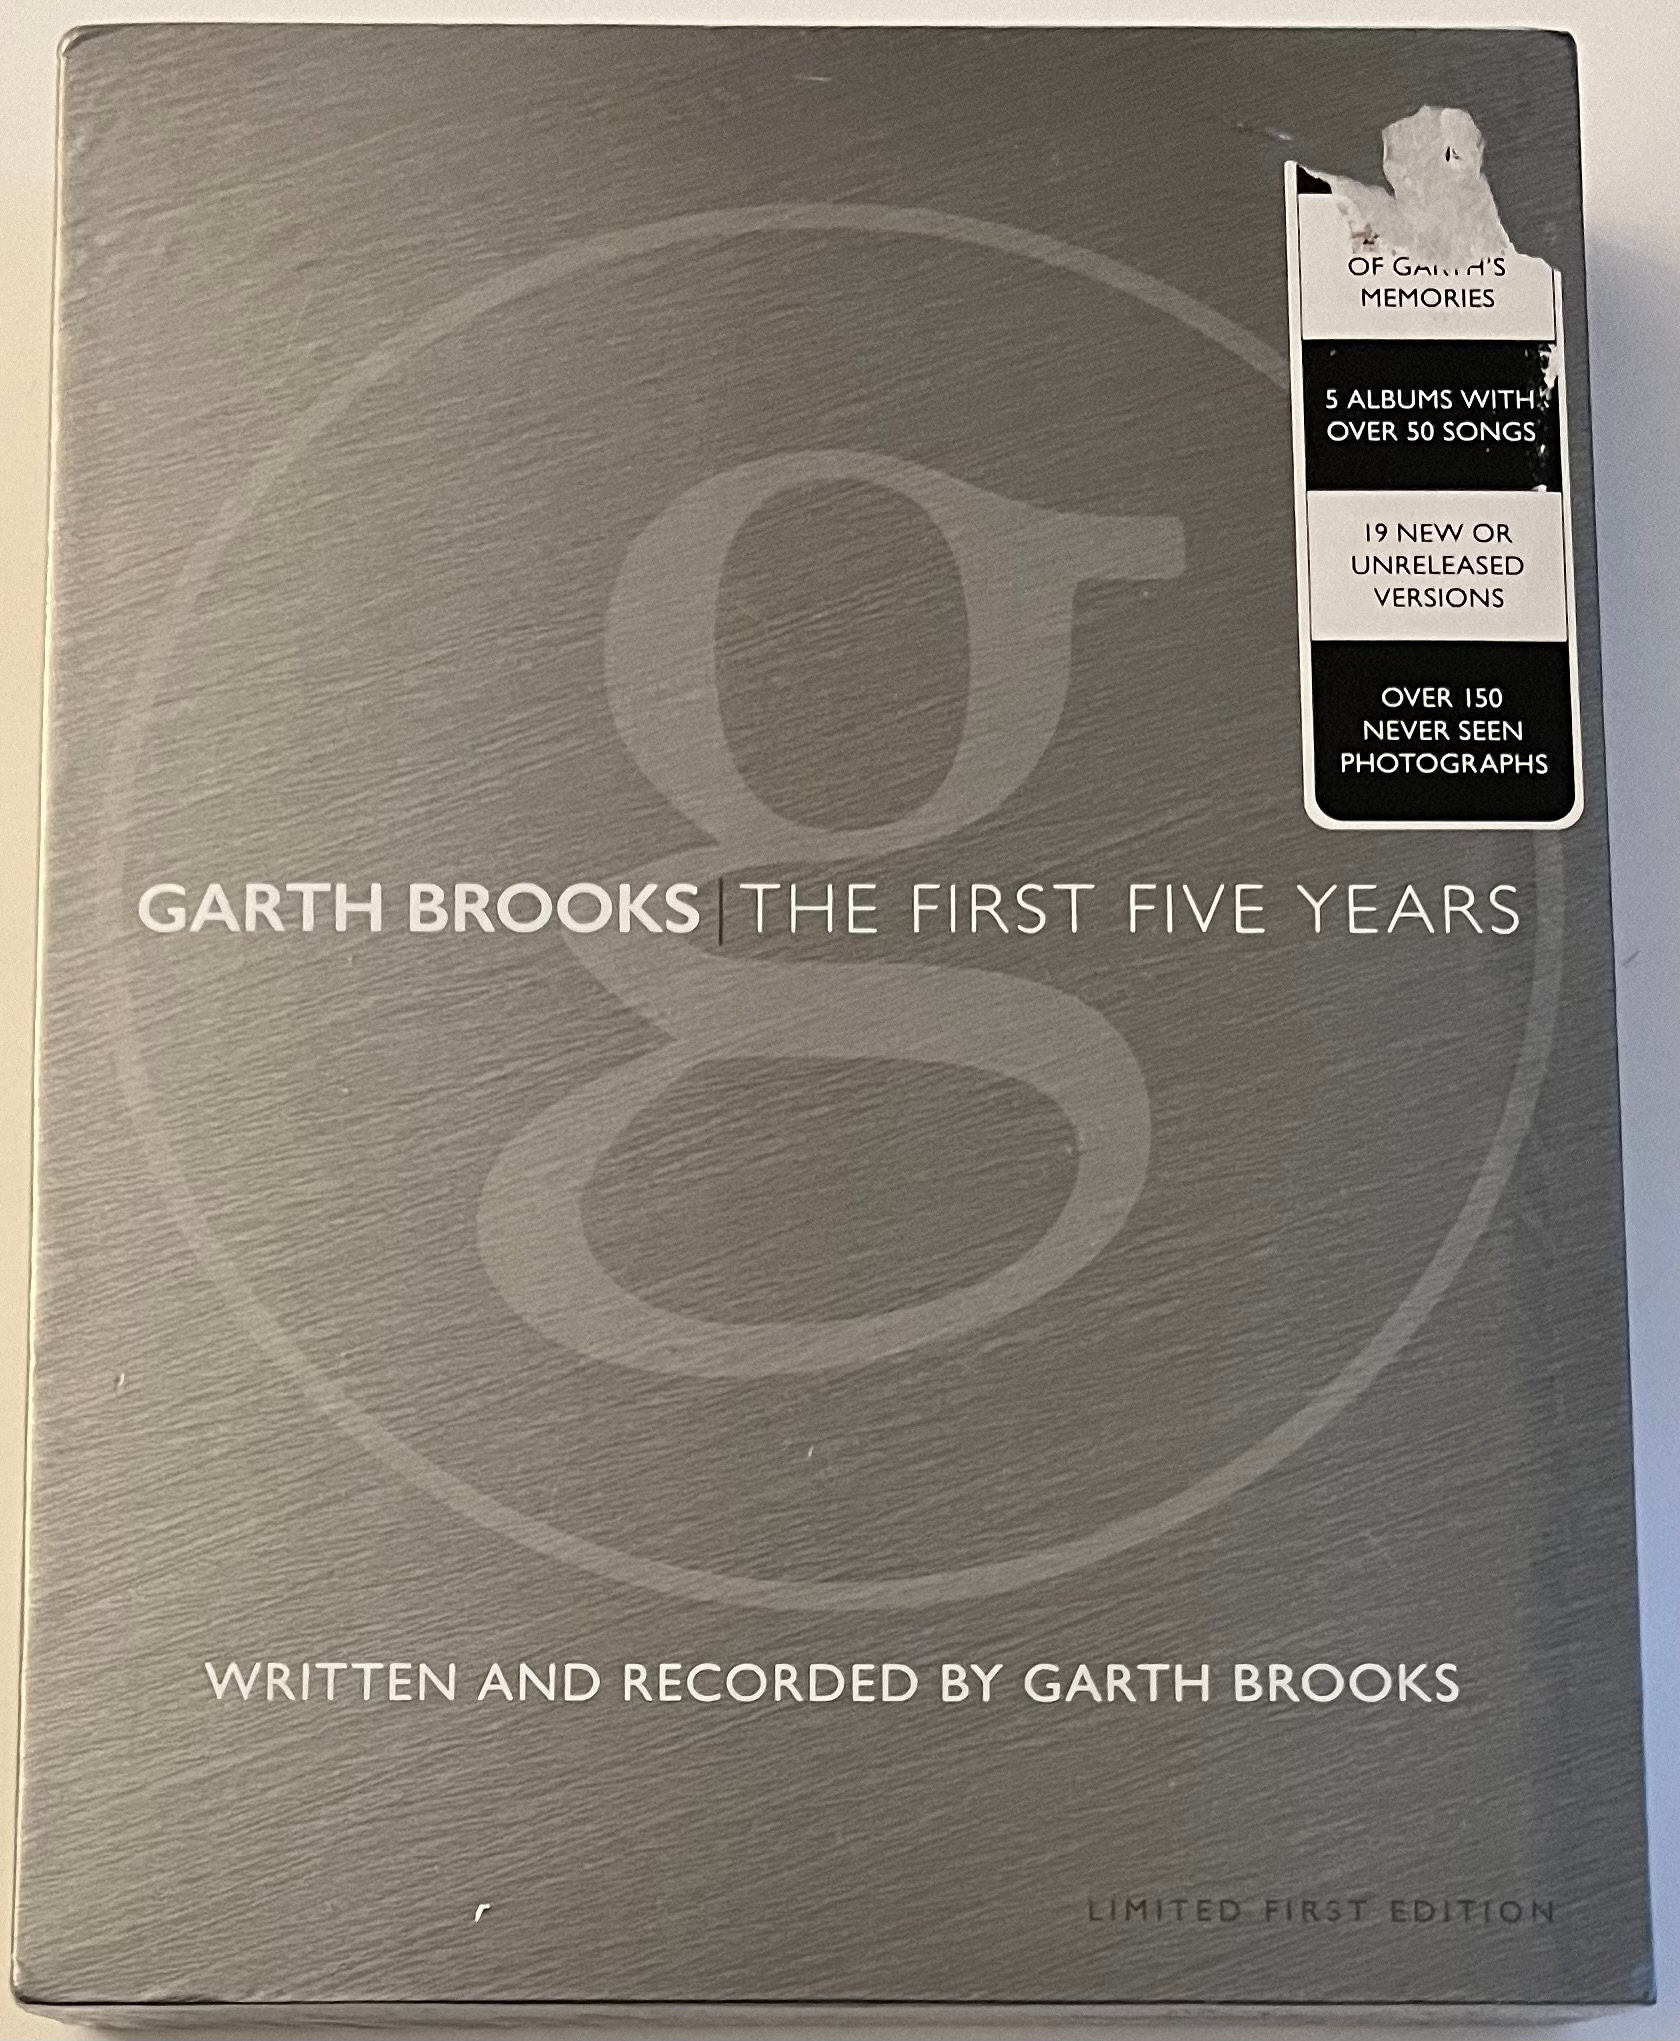 Garth Brooks the First Five Years the Anthology Part 1 hard Cover